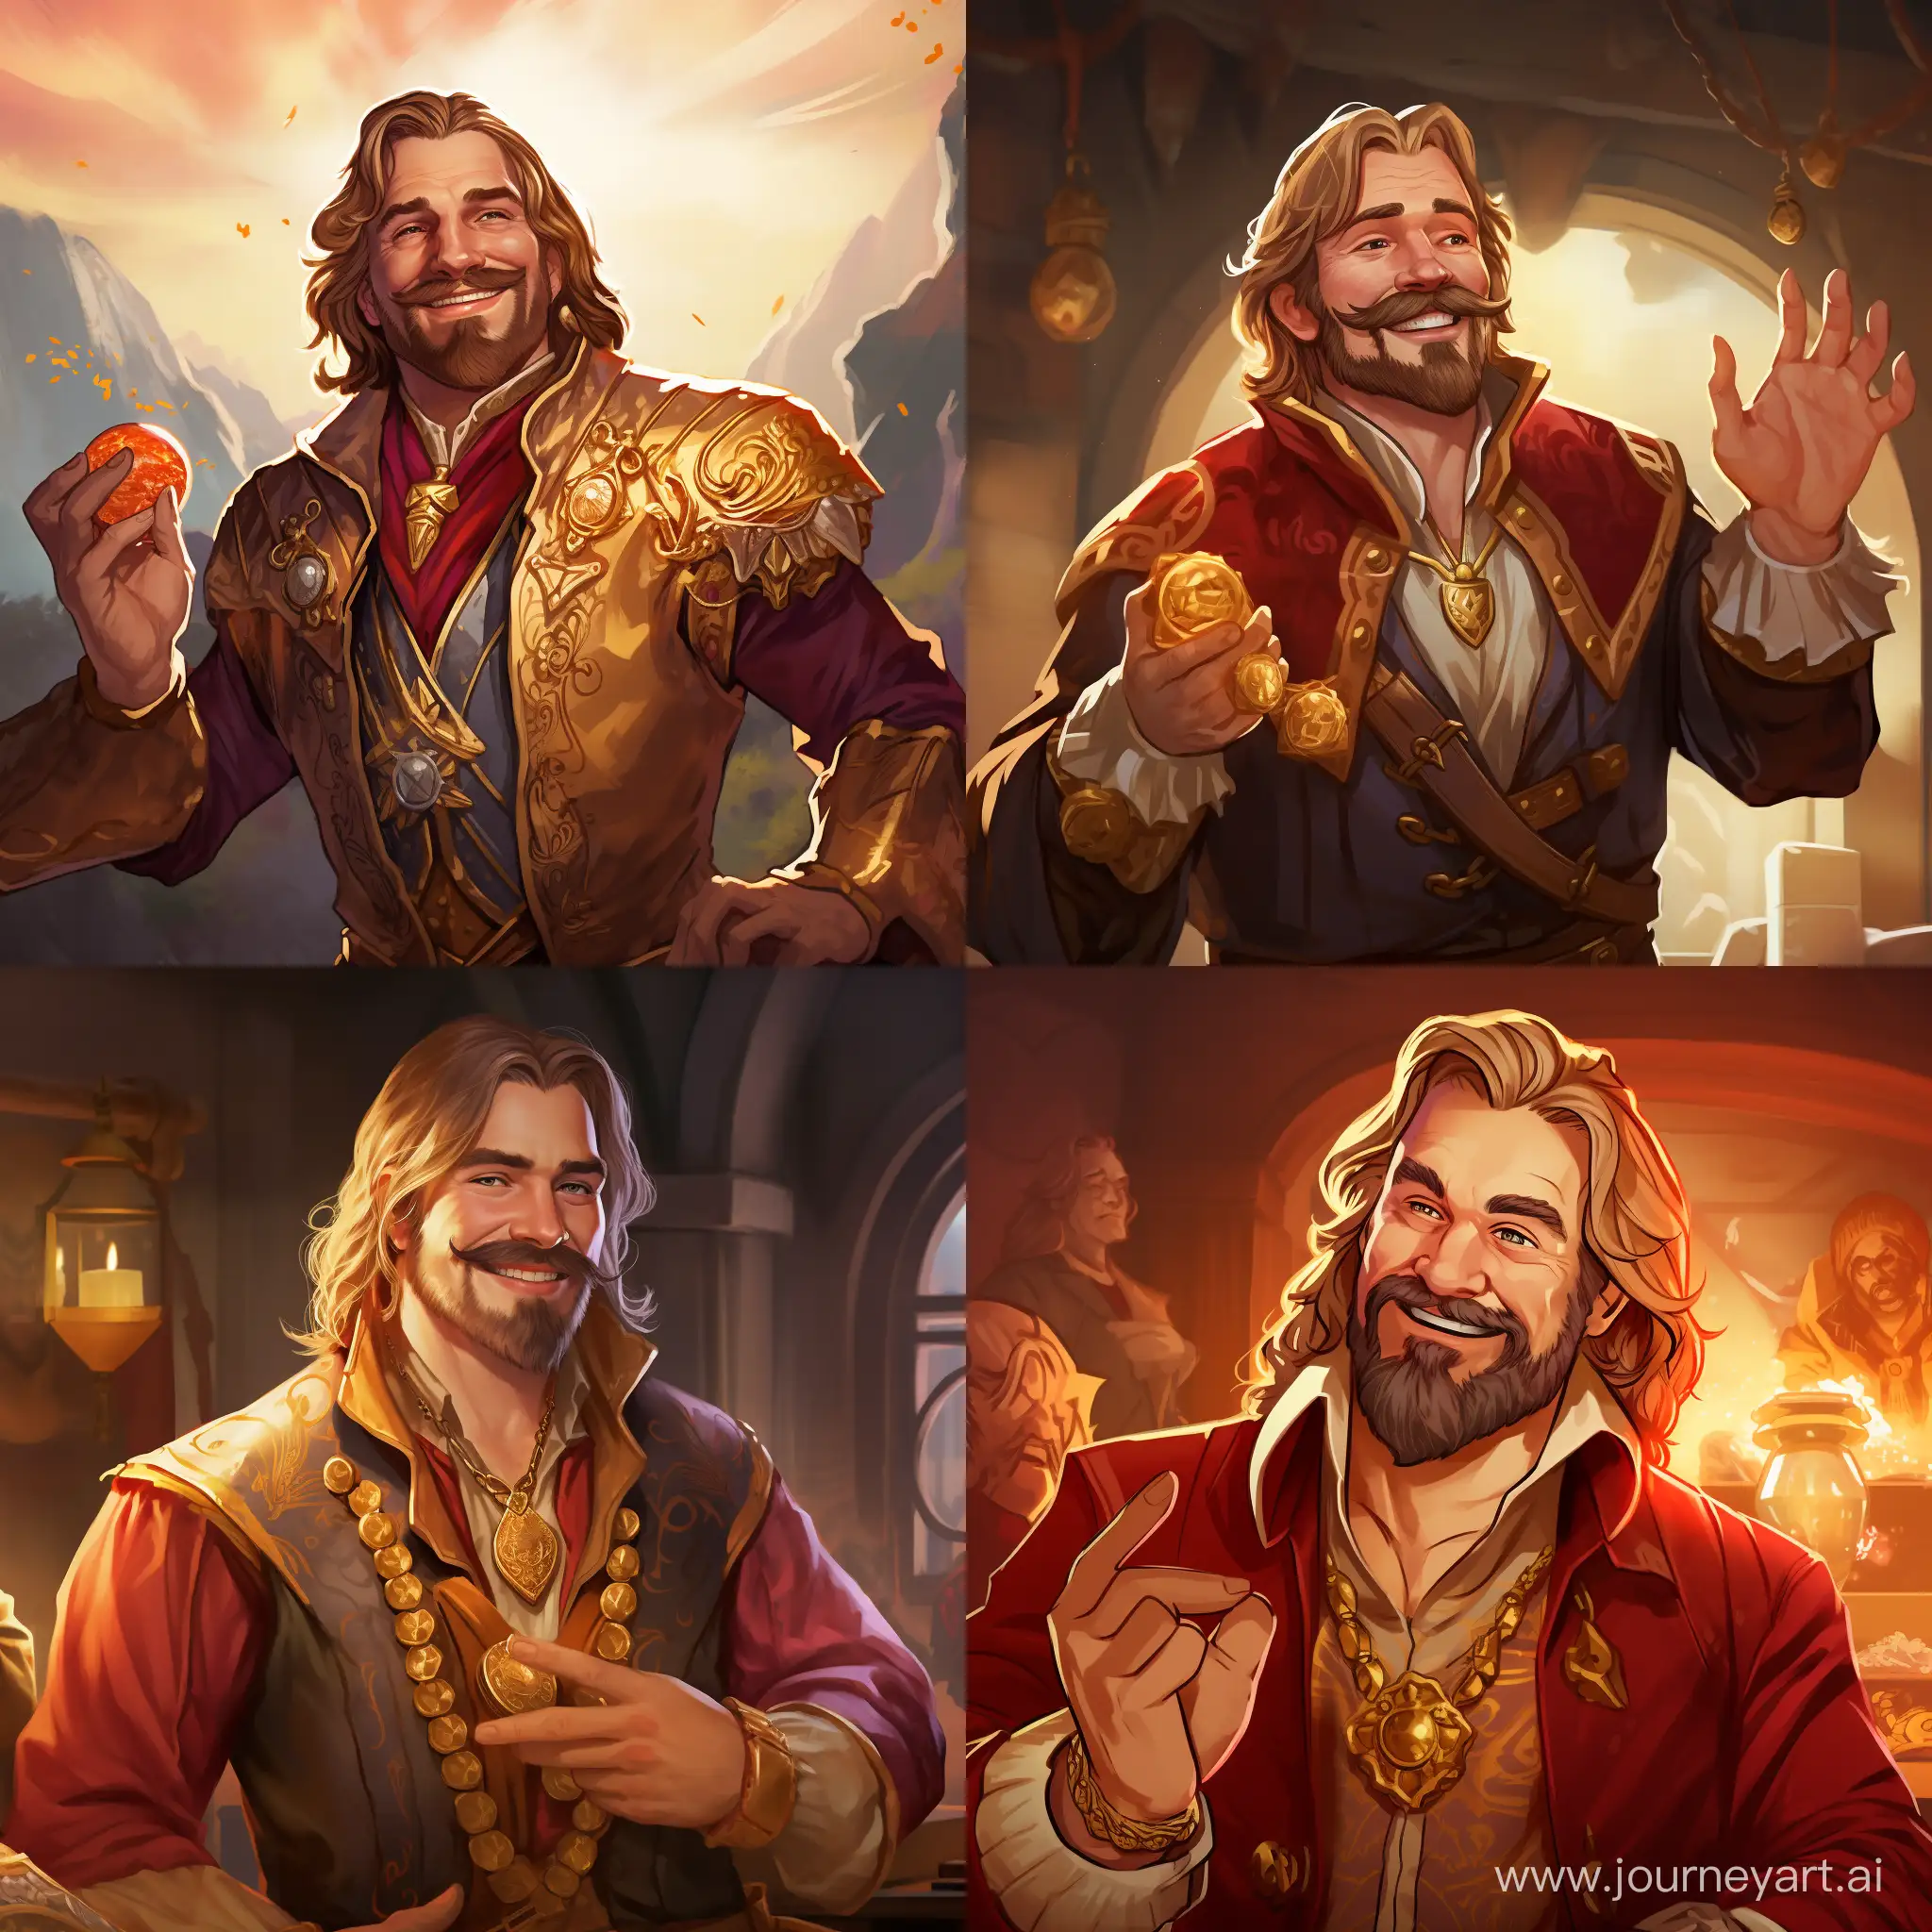 Smiling-Viking-Trader-with-Ruby-and-Precious-Rings-in-Expensive-Attire